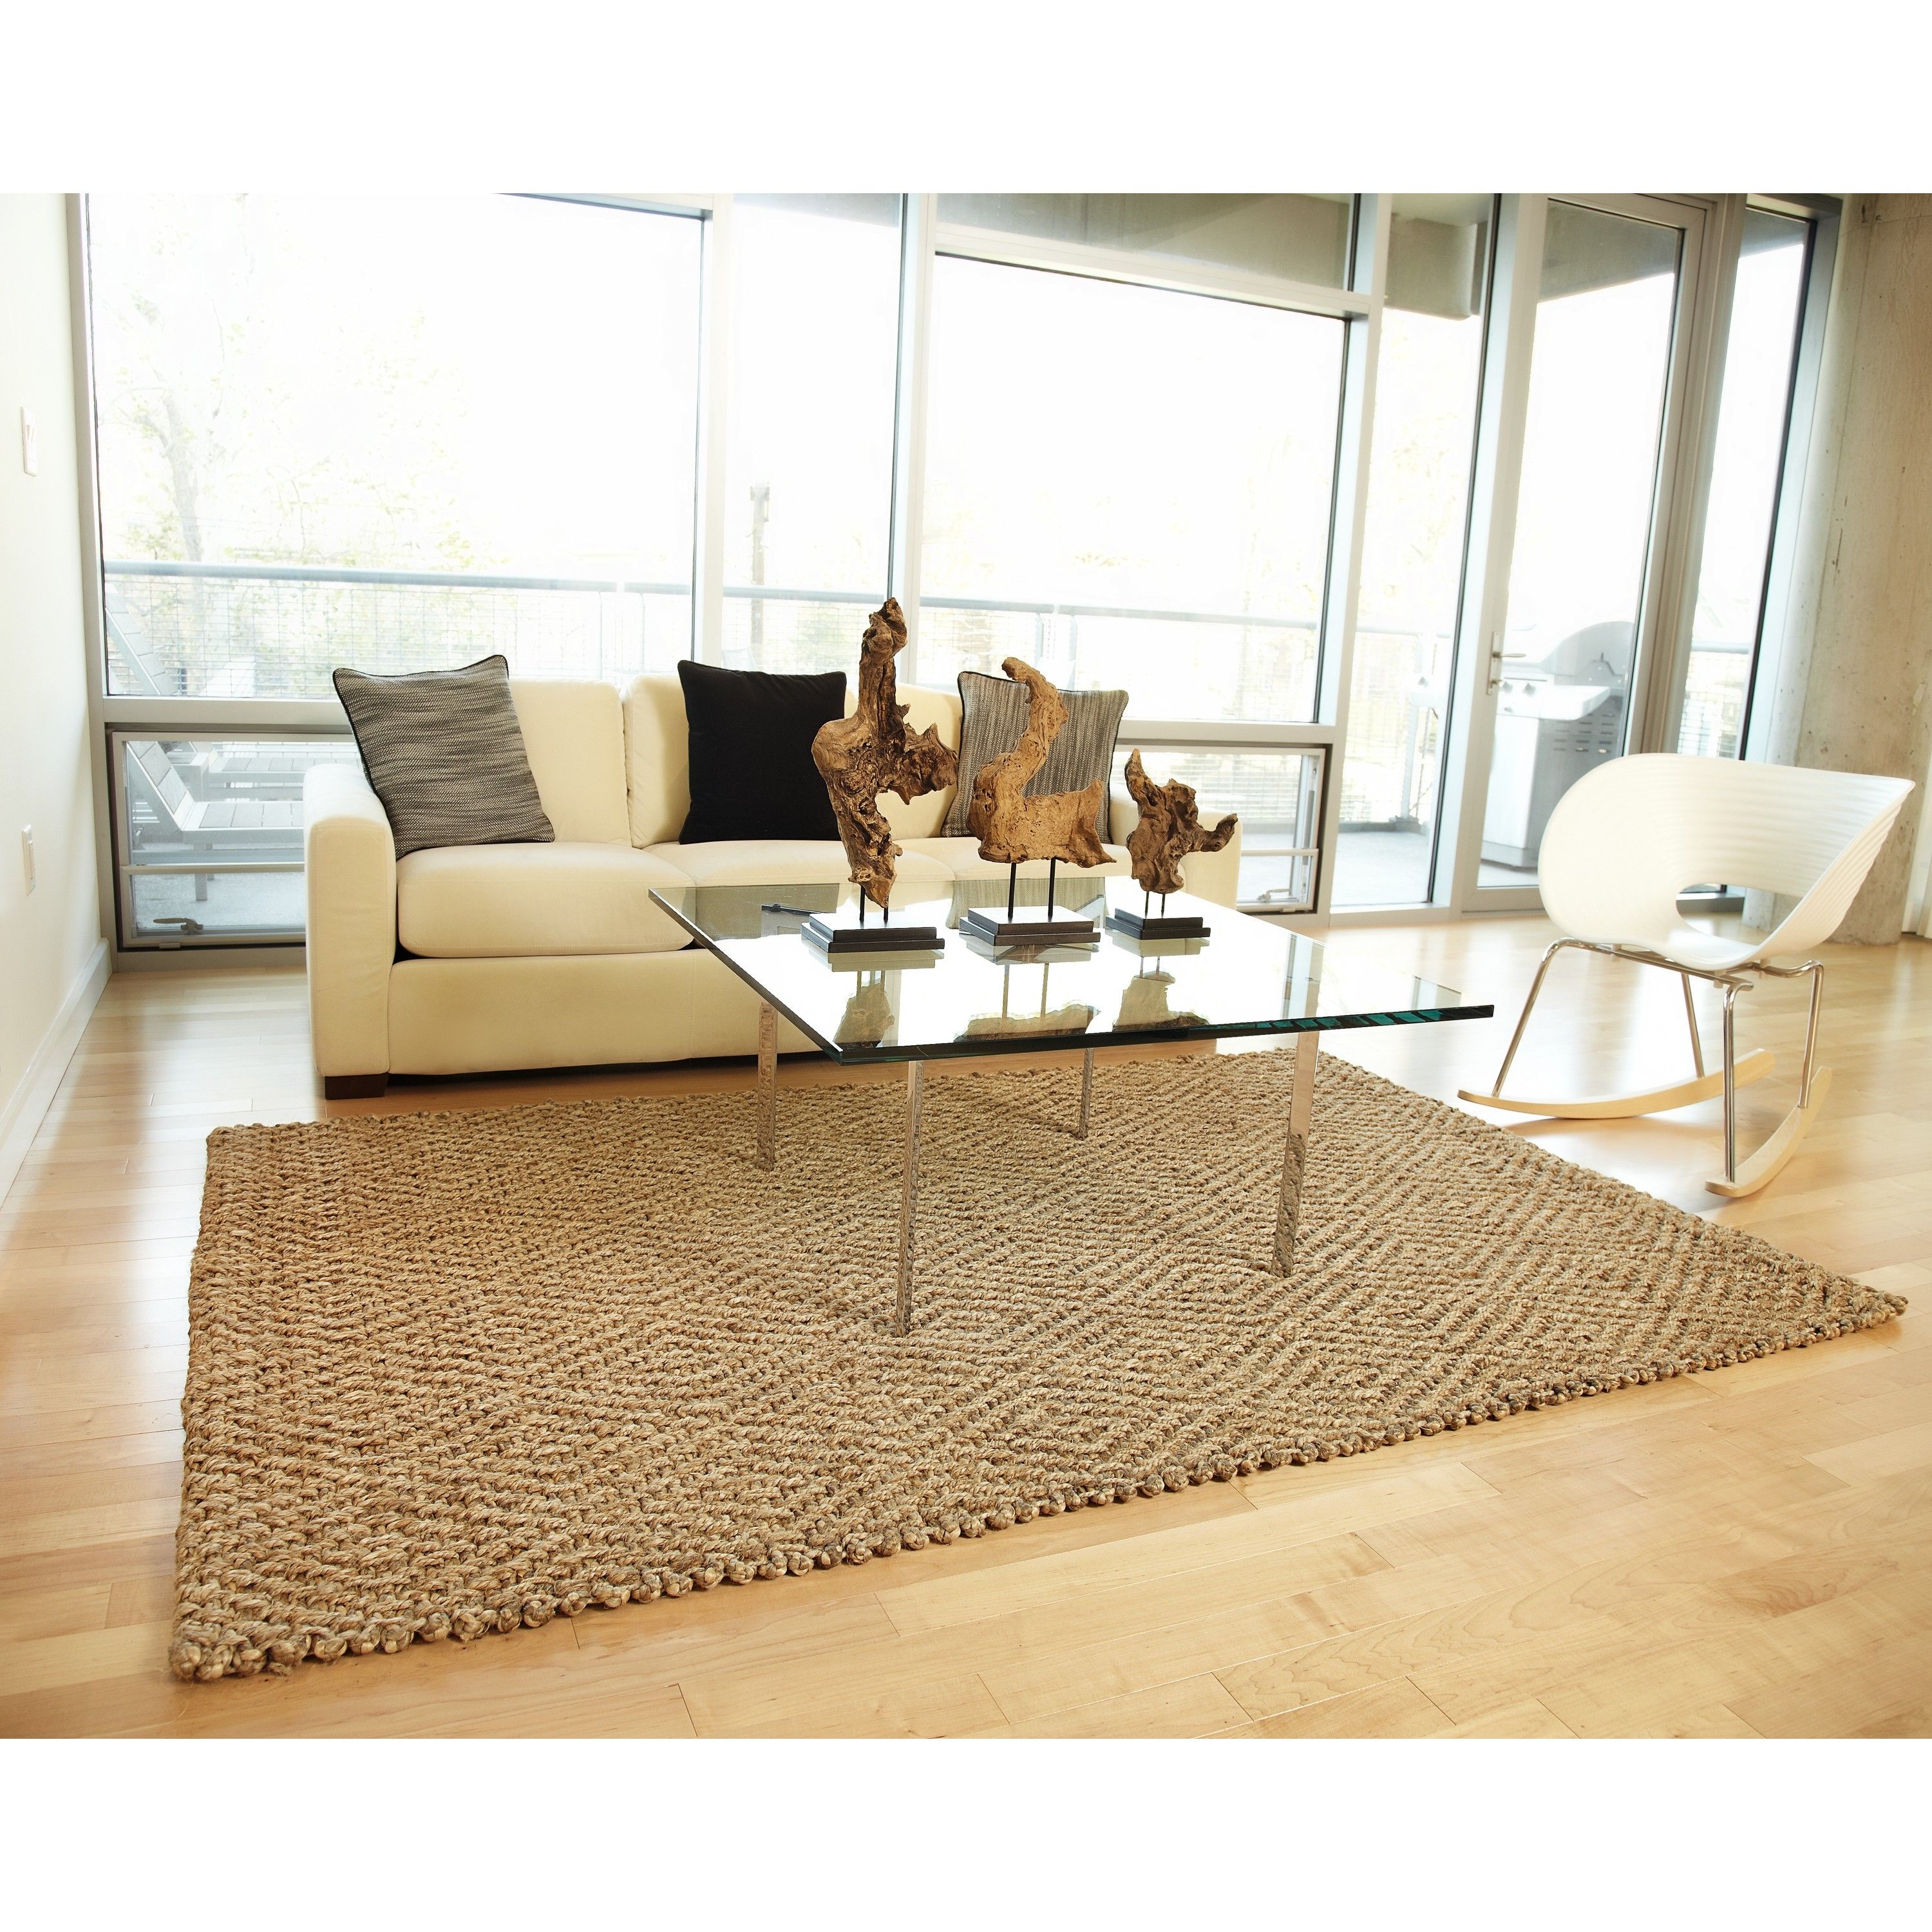 Rugs Cozy 4×6 Area Rugs For Your Interior Floor Accessories Ideas With Wool Jute Area Rugs (View 15 of 15)